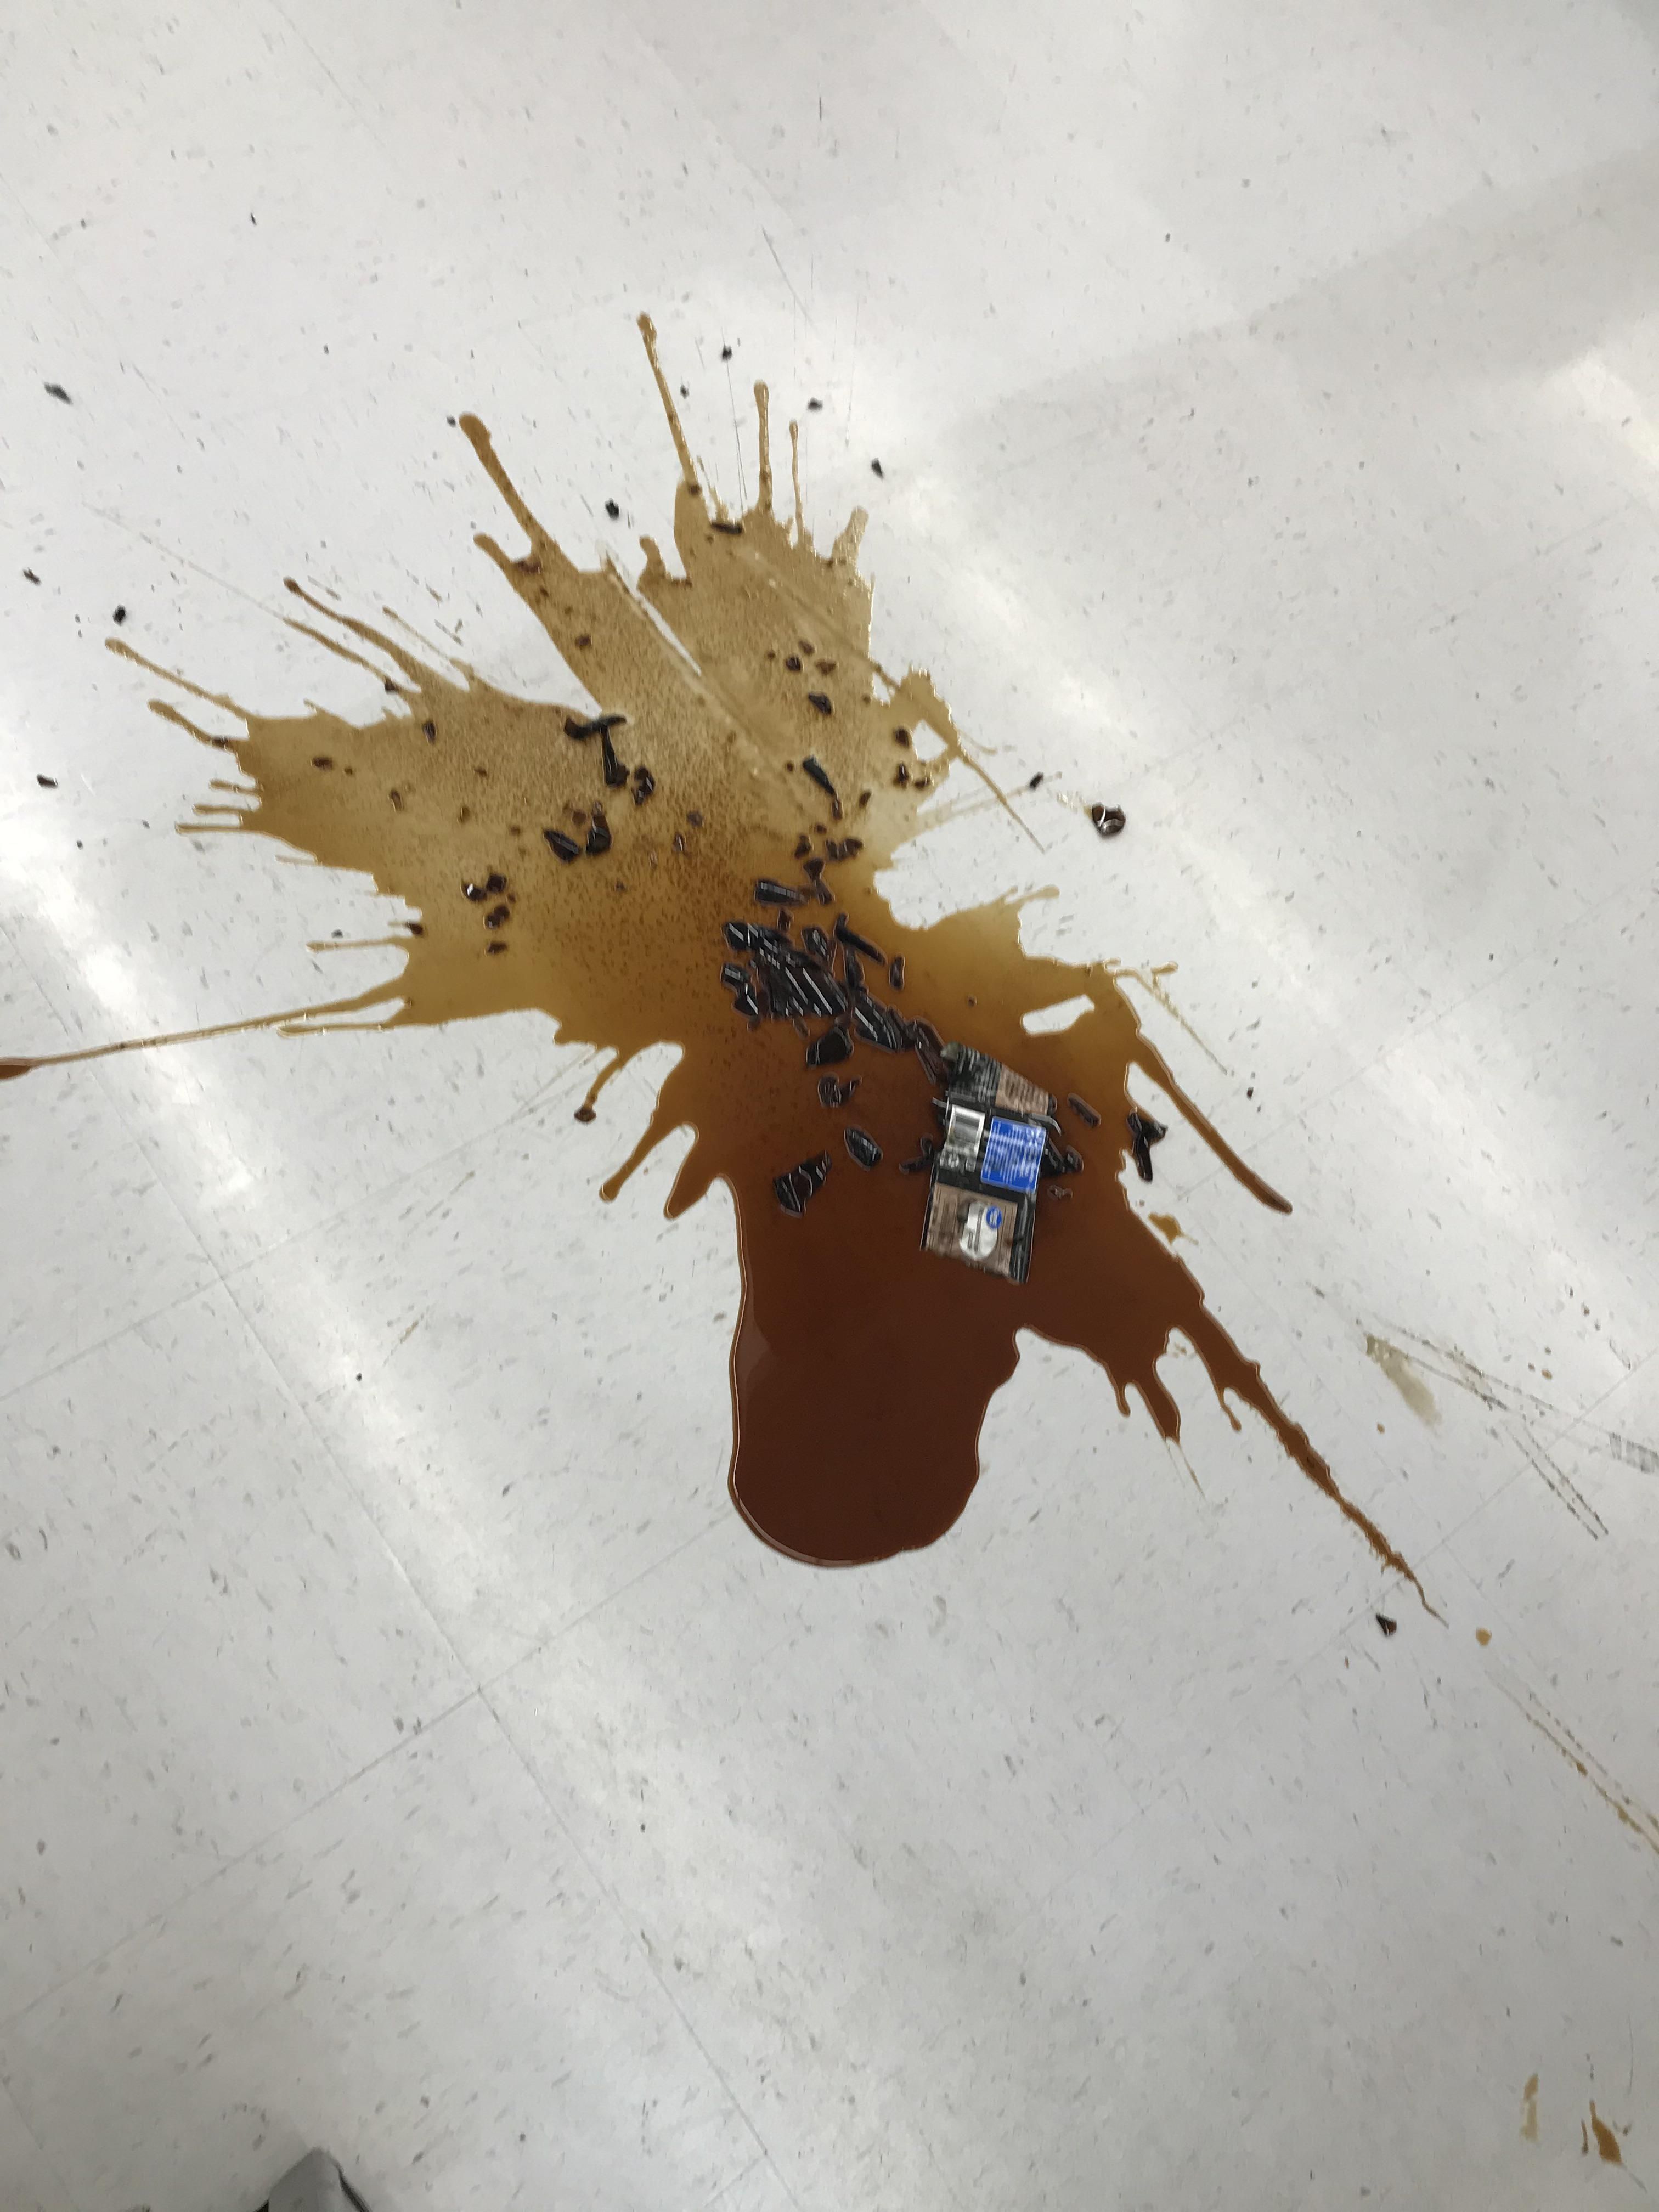 Someone dropped a thing of Worcestershire sauce at work yesterday and it looks like a moose.